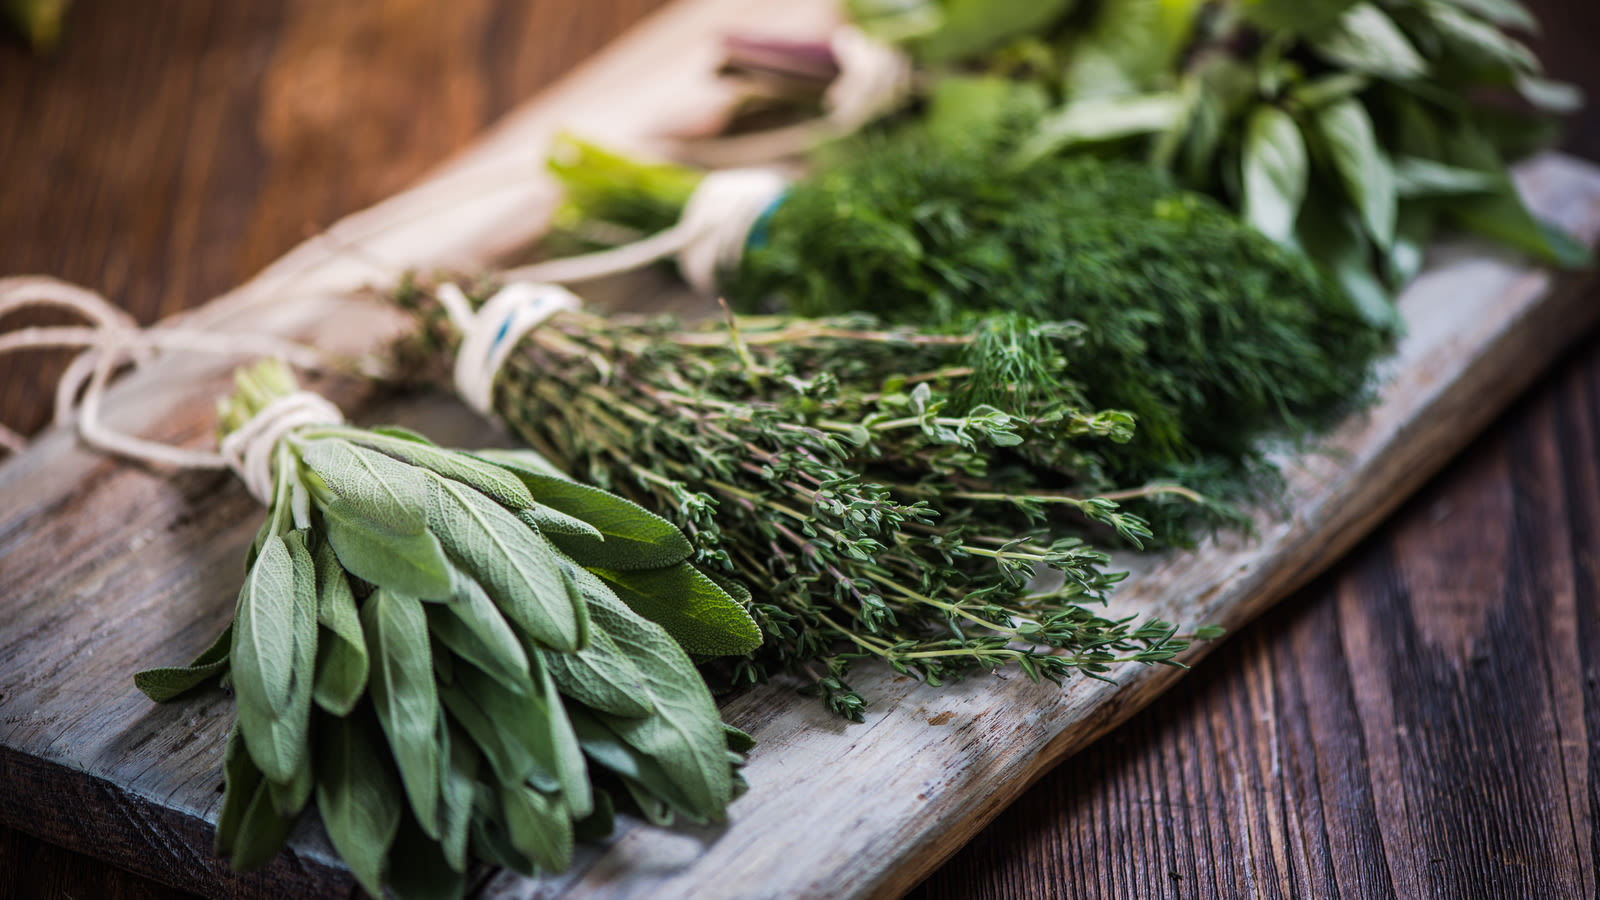 15 Mistakes Everyone Makes When Cooking With Herbs